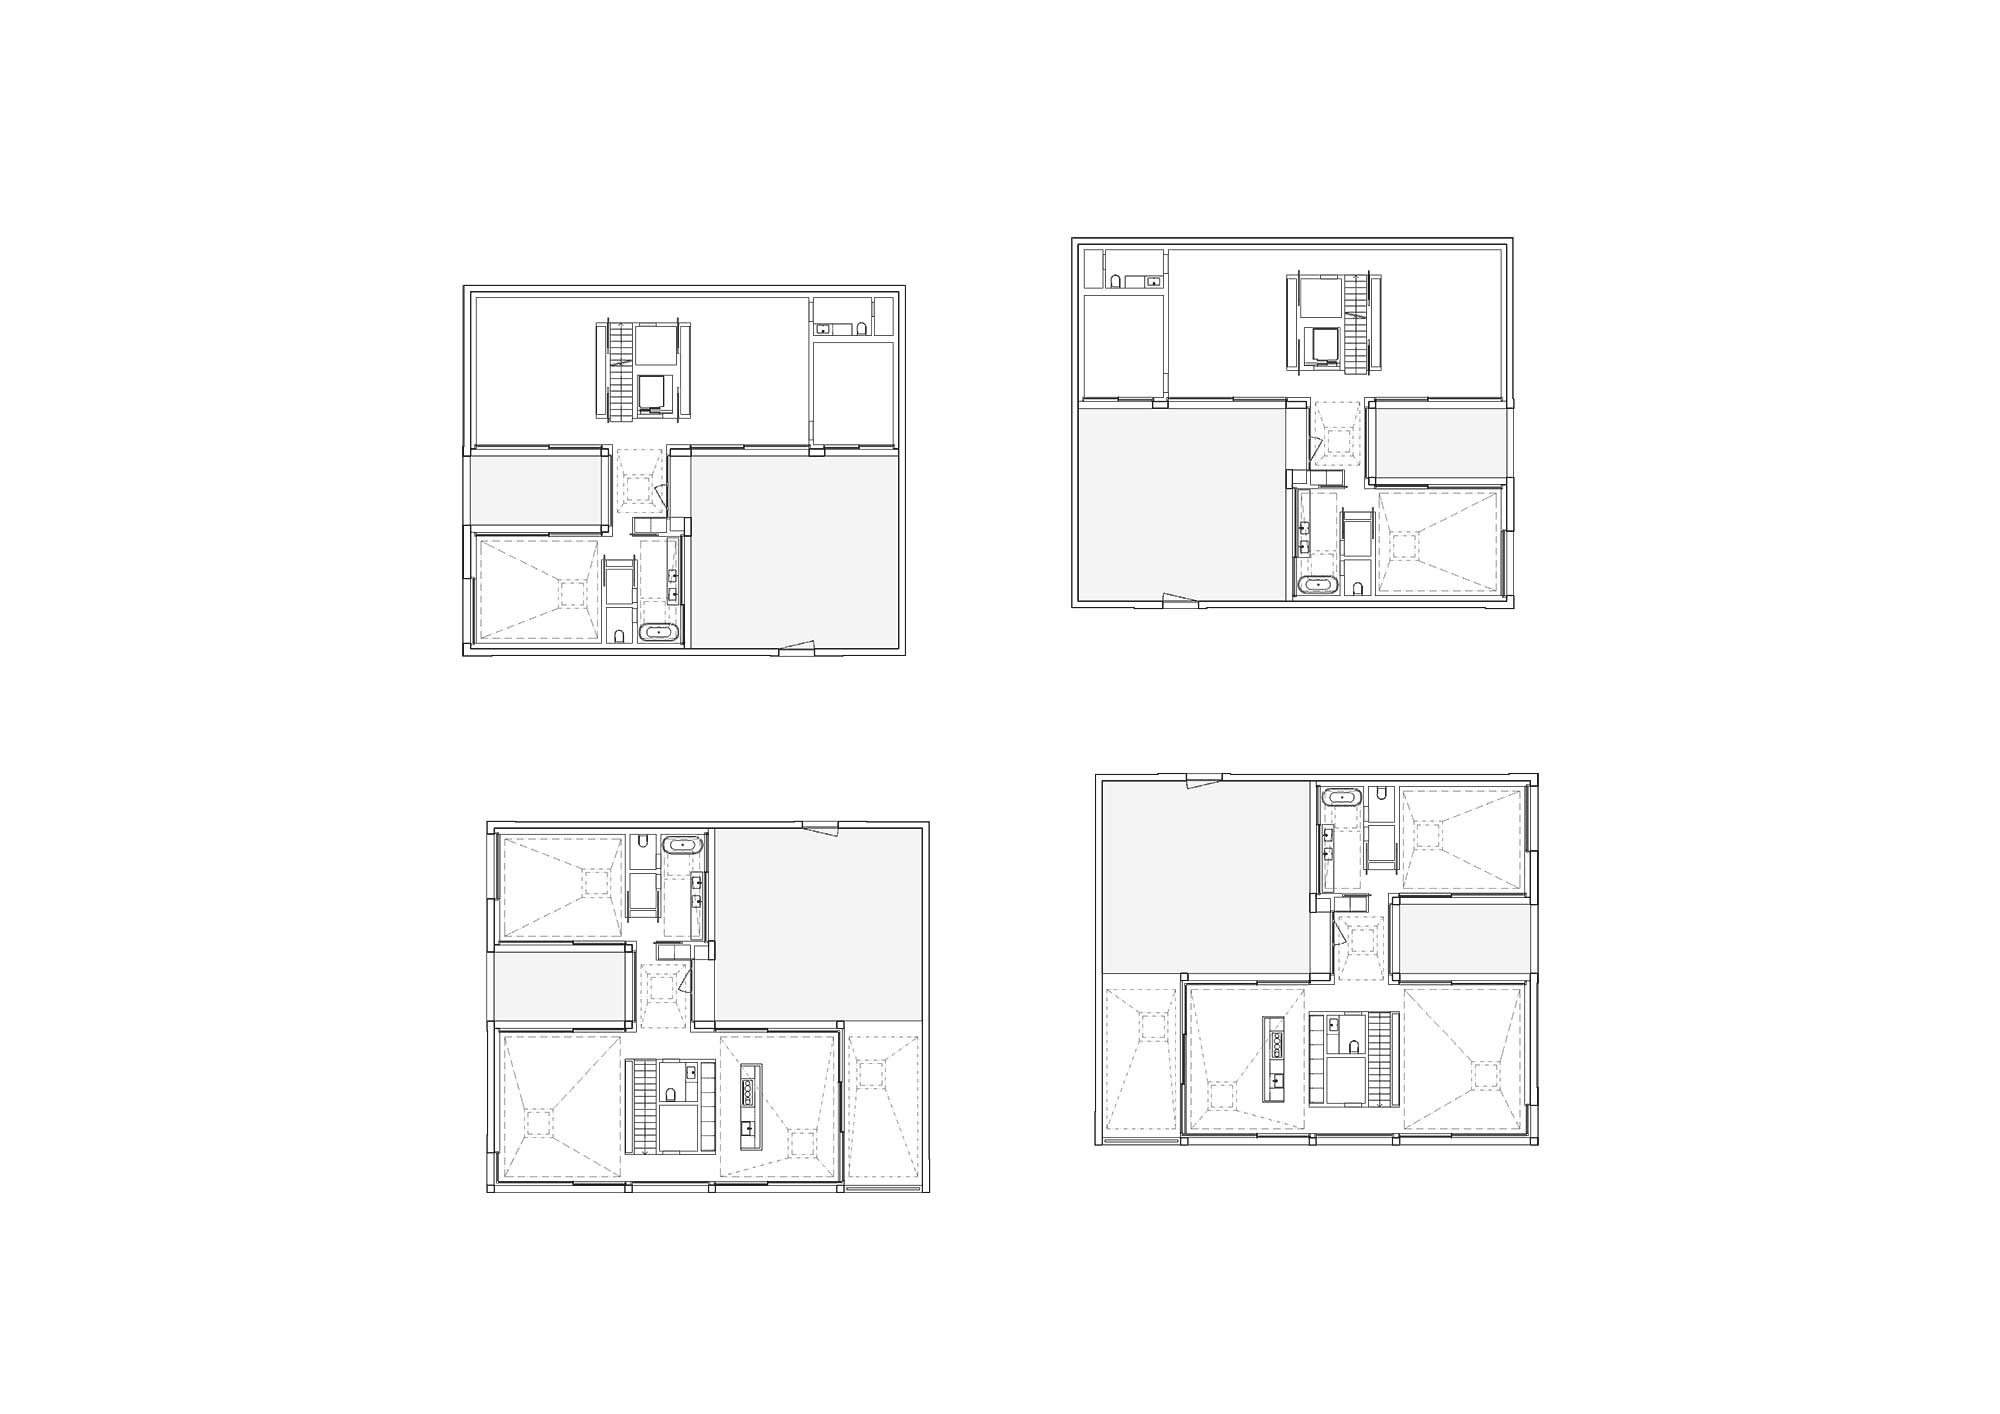 Floor Plans - Courtyard Houses in Zumikon / Think Architecture